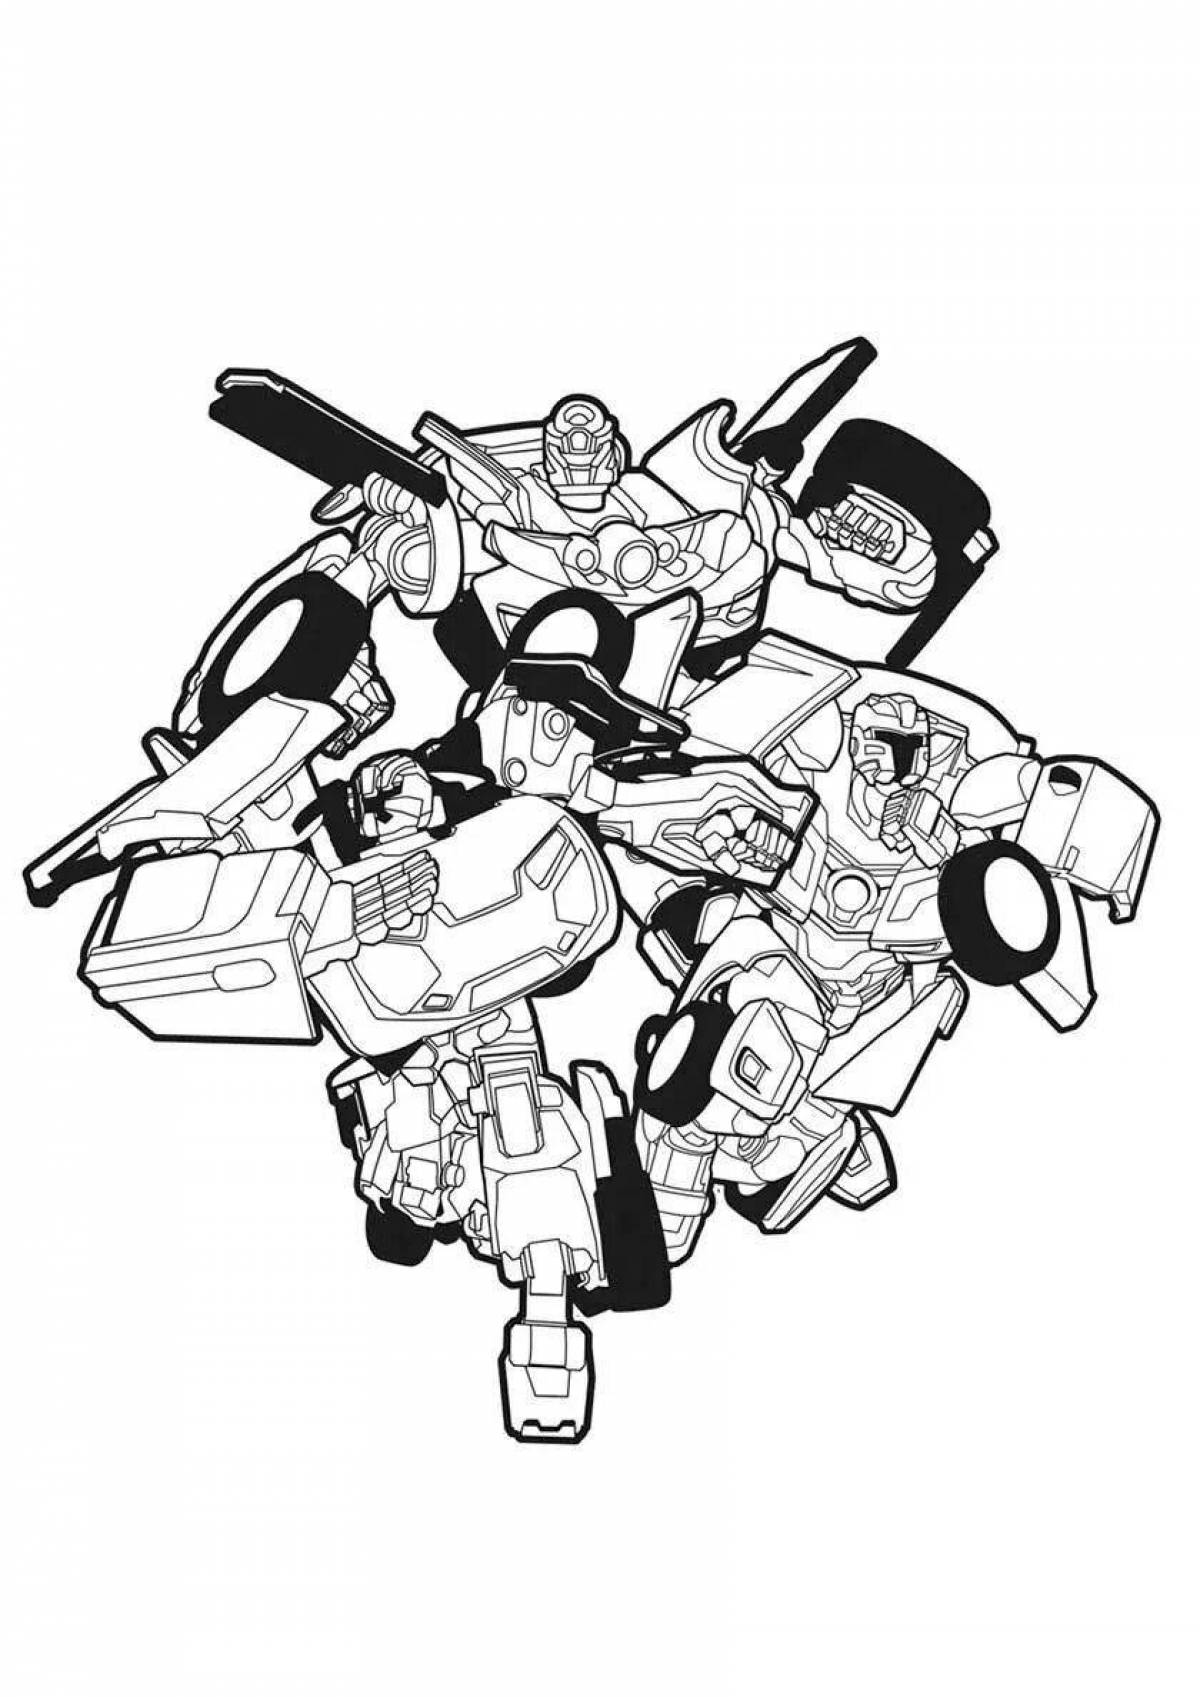 Vibrant tobot x coloring page